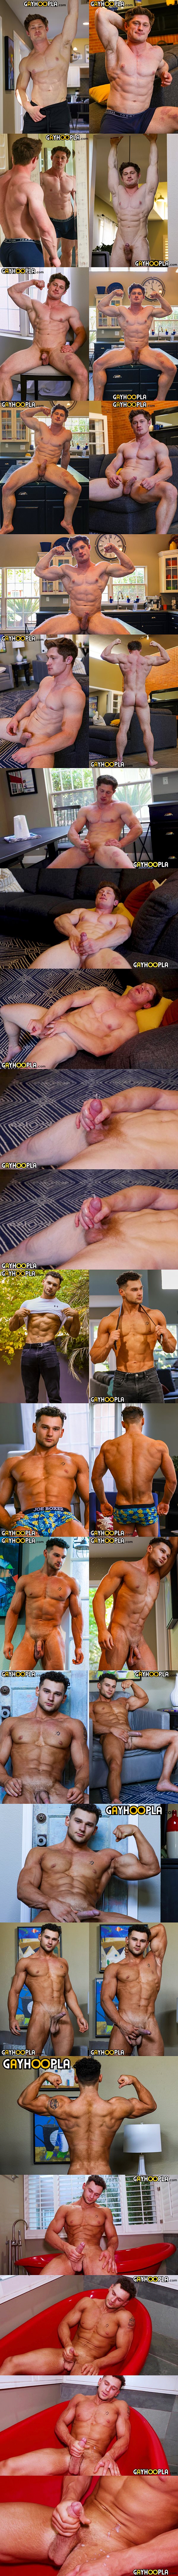 Gay Hoopla - ripped muscle hunk Justin Sharp and hot straight bodybuilder Zack Dickson jerk off for the first time on camera 02